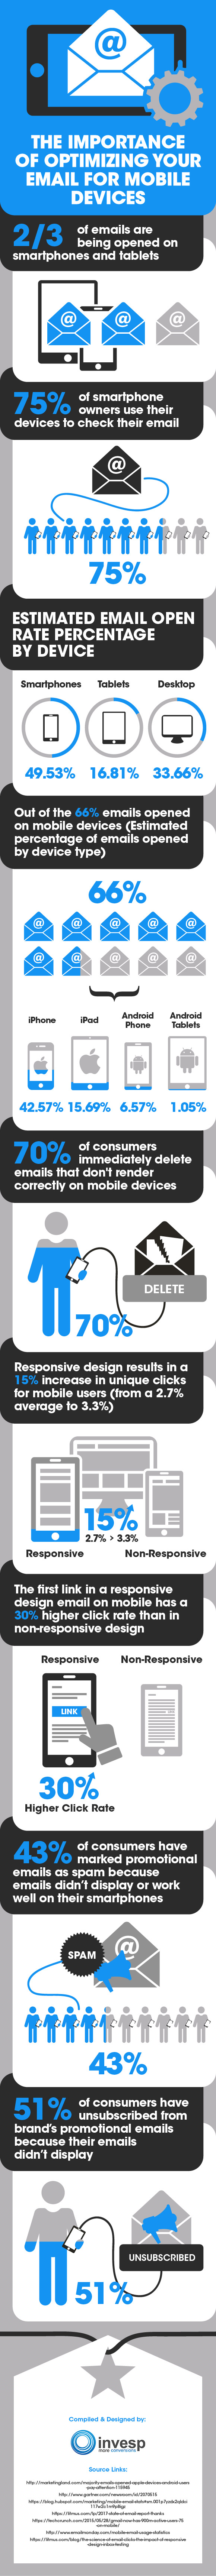 Email Mobile optimization